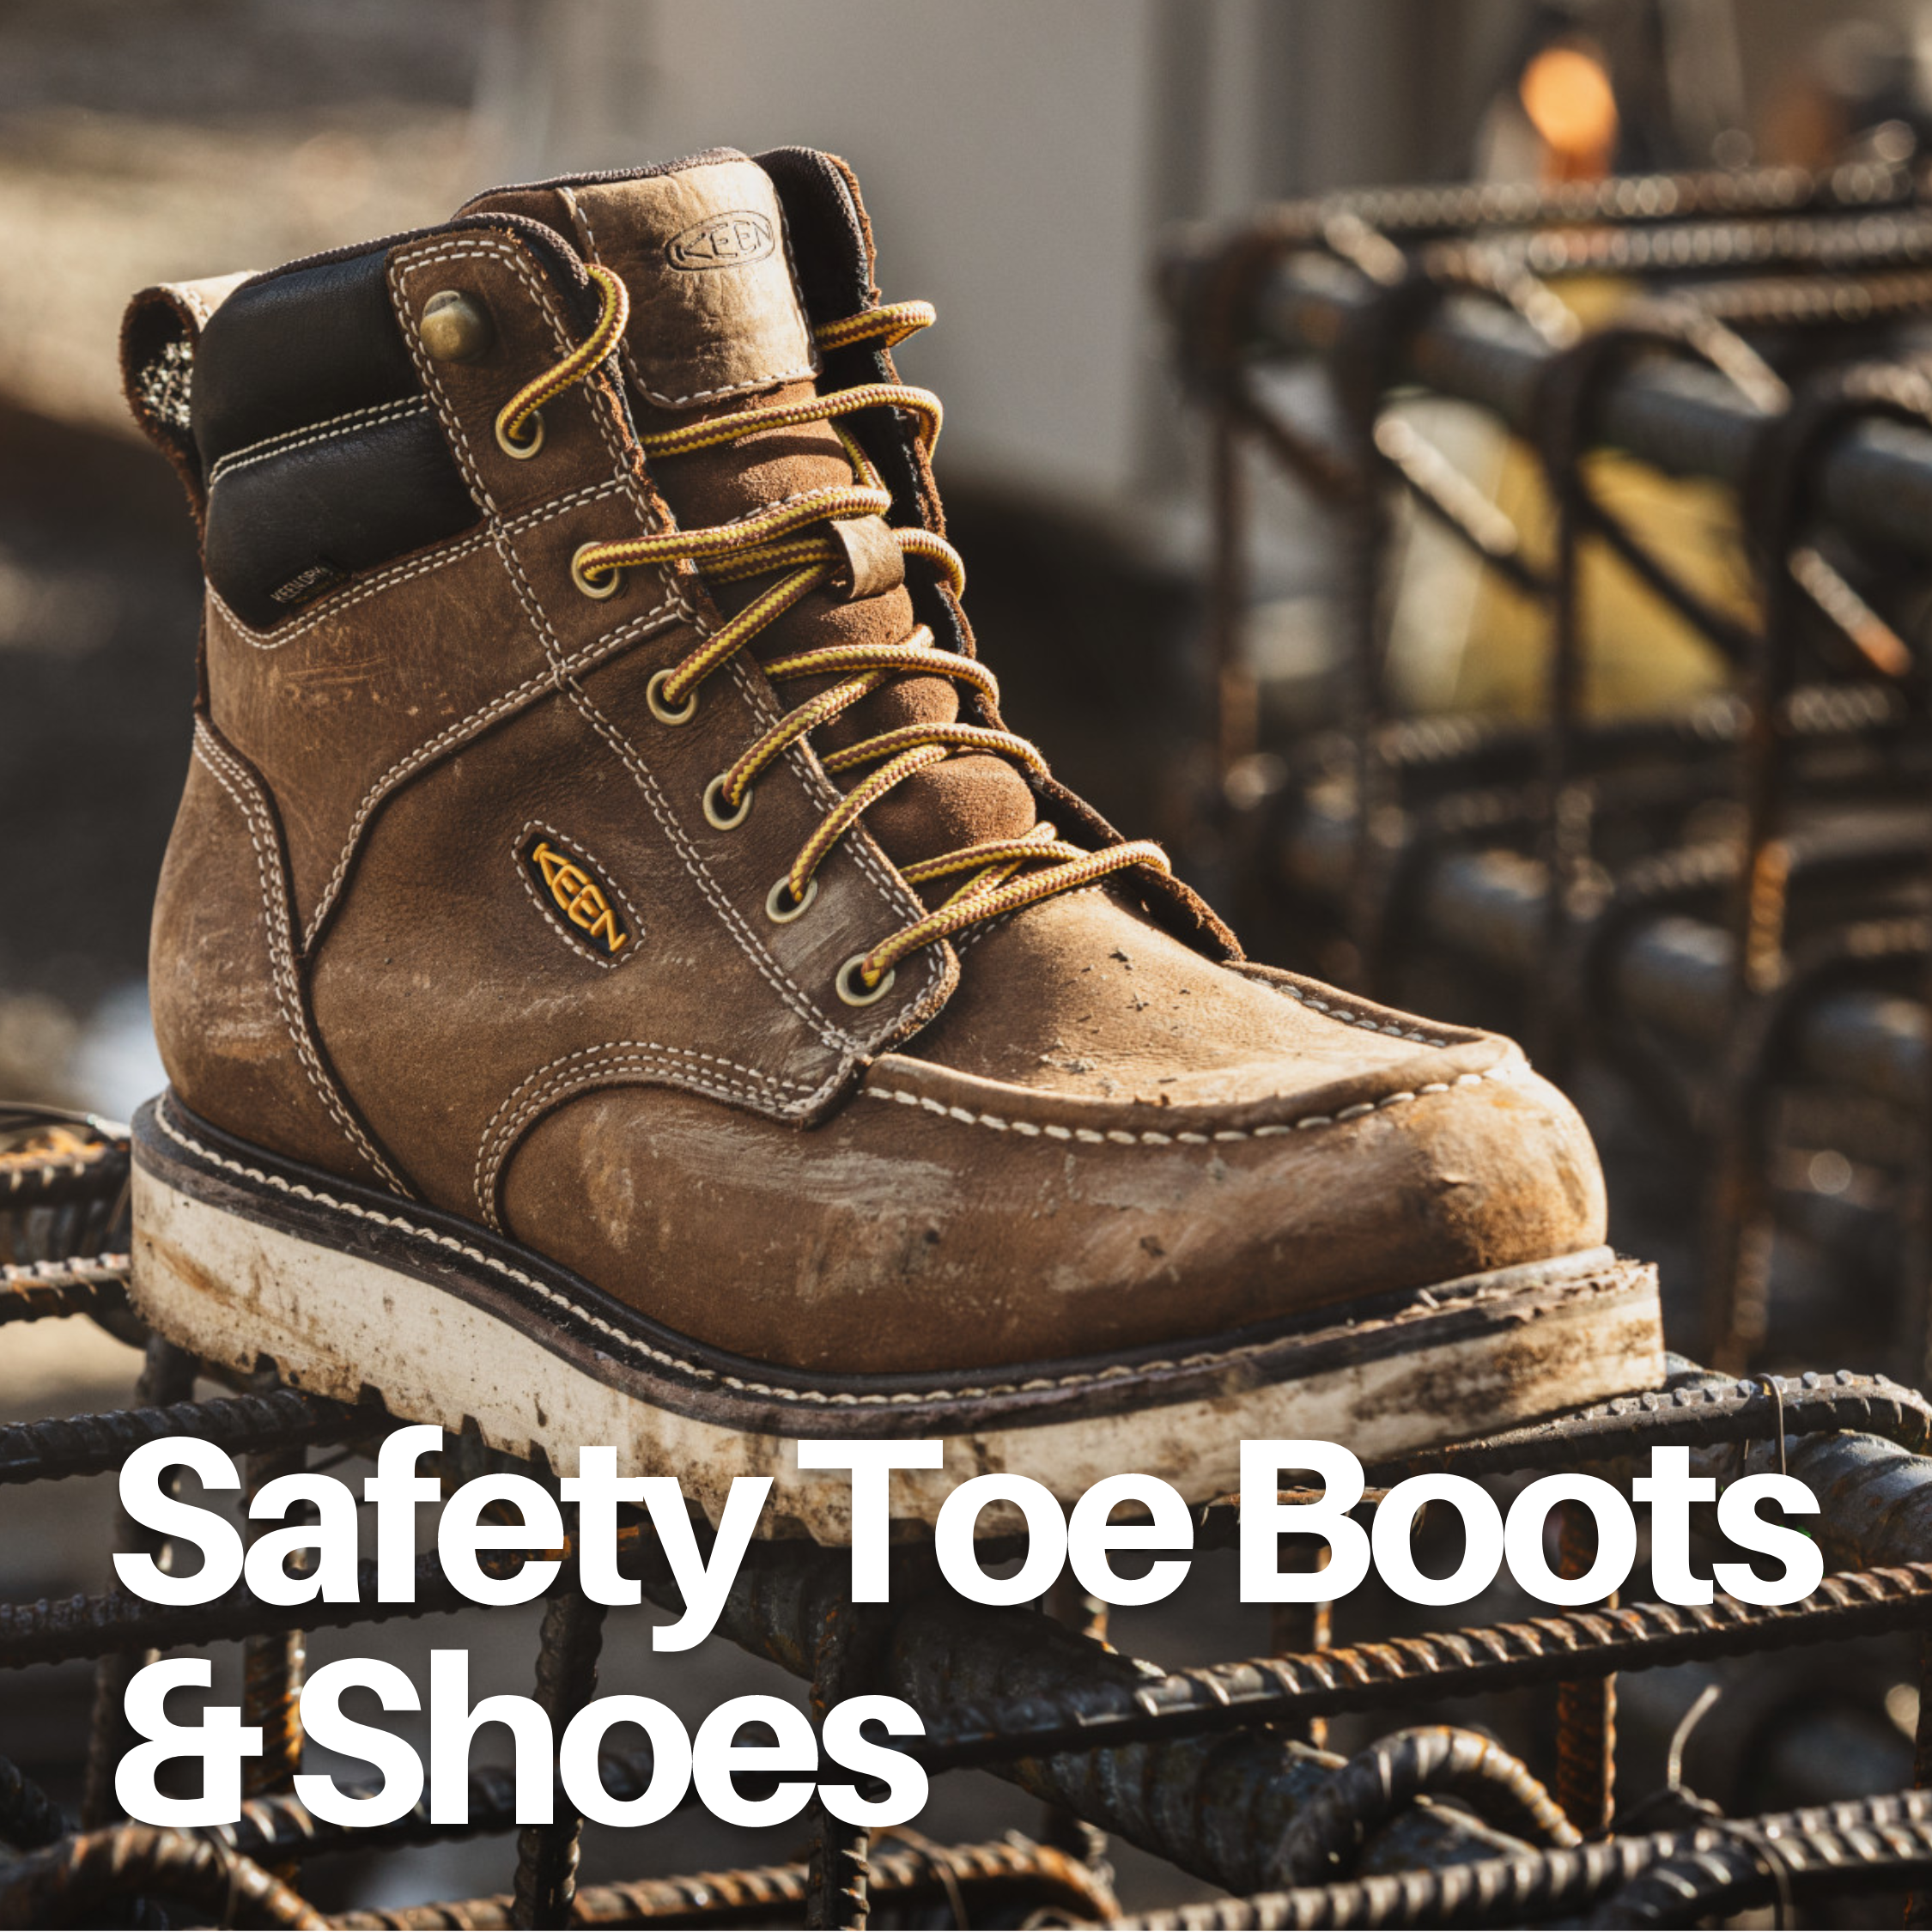 Safety Toe boots and shoes